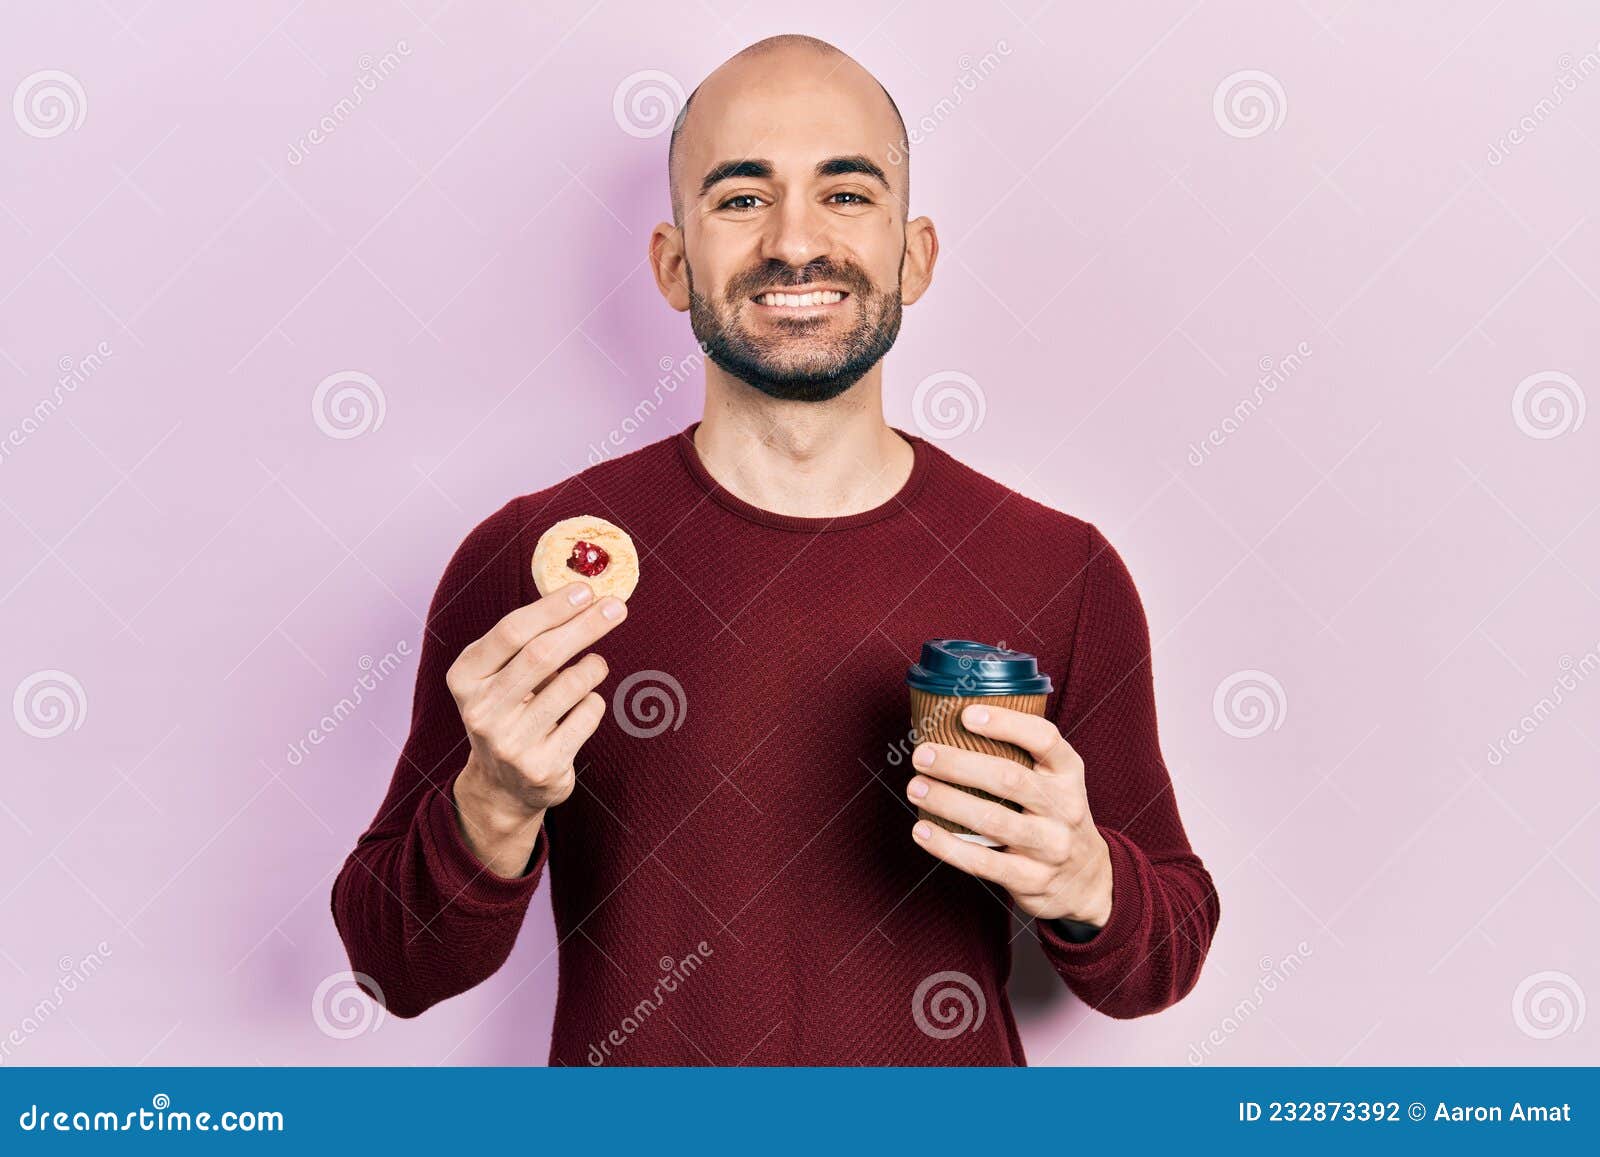 Young Bald Man Drinking Coffee and Eating Pastry Smiling with a Happy ...